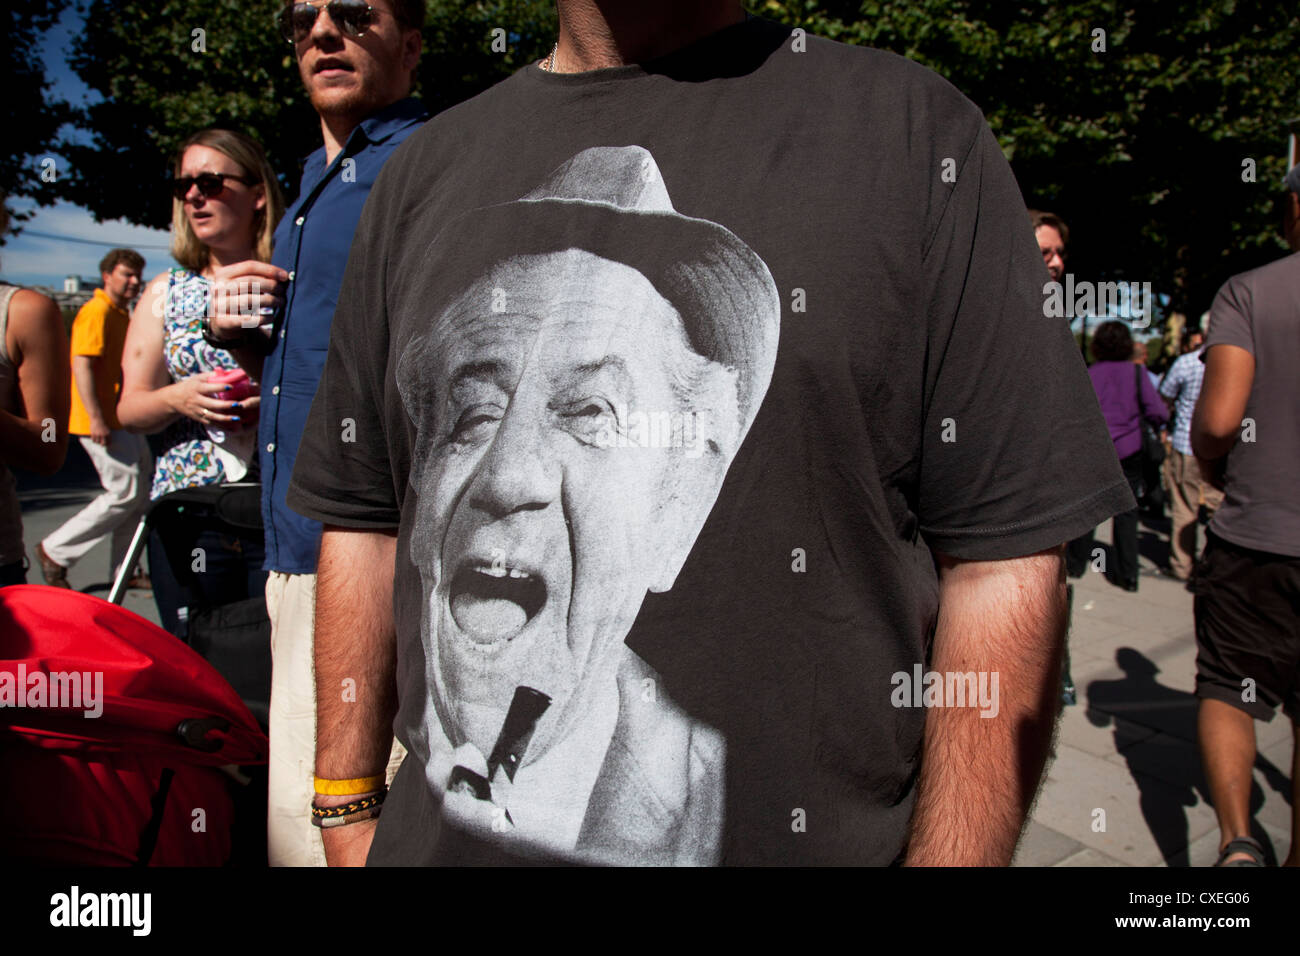 A t-shirt showing the laughing face of Carry On Films comedian and actor Sid James. He was known for his trademark 'dirty laugh' and lascivious persona. London, UK. Stock Photo